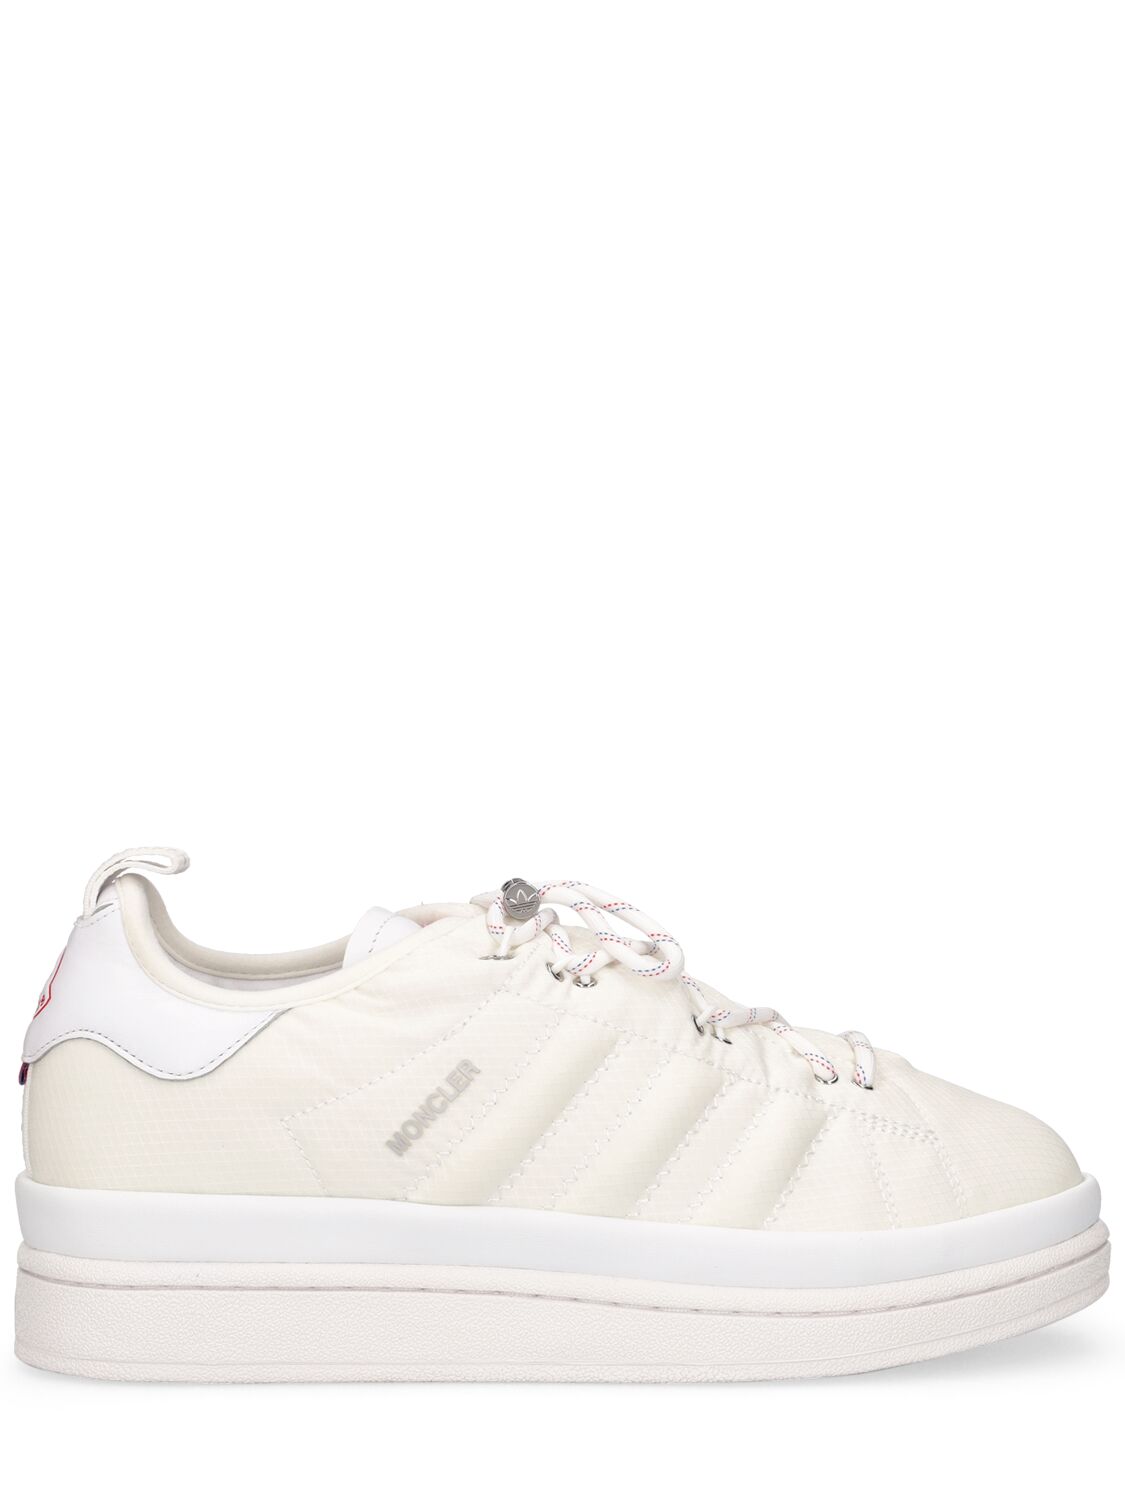 Moncler Genius Moncler X Adidas Campus Leather Sneakers In Optic White